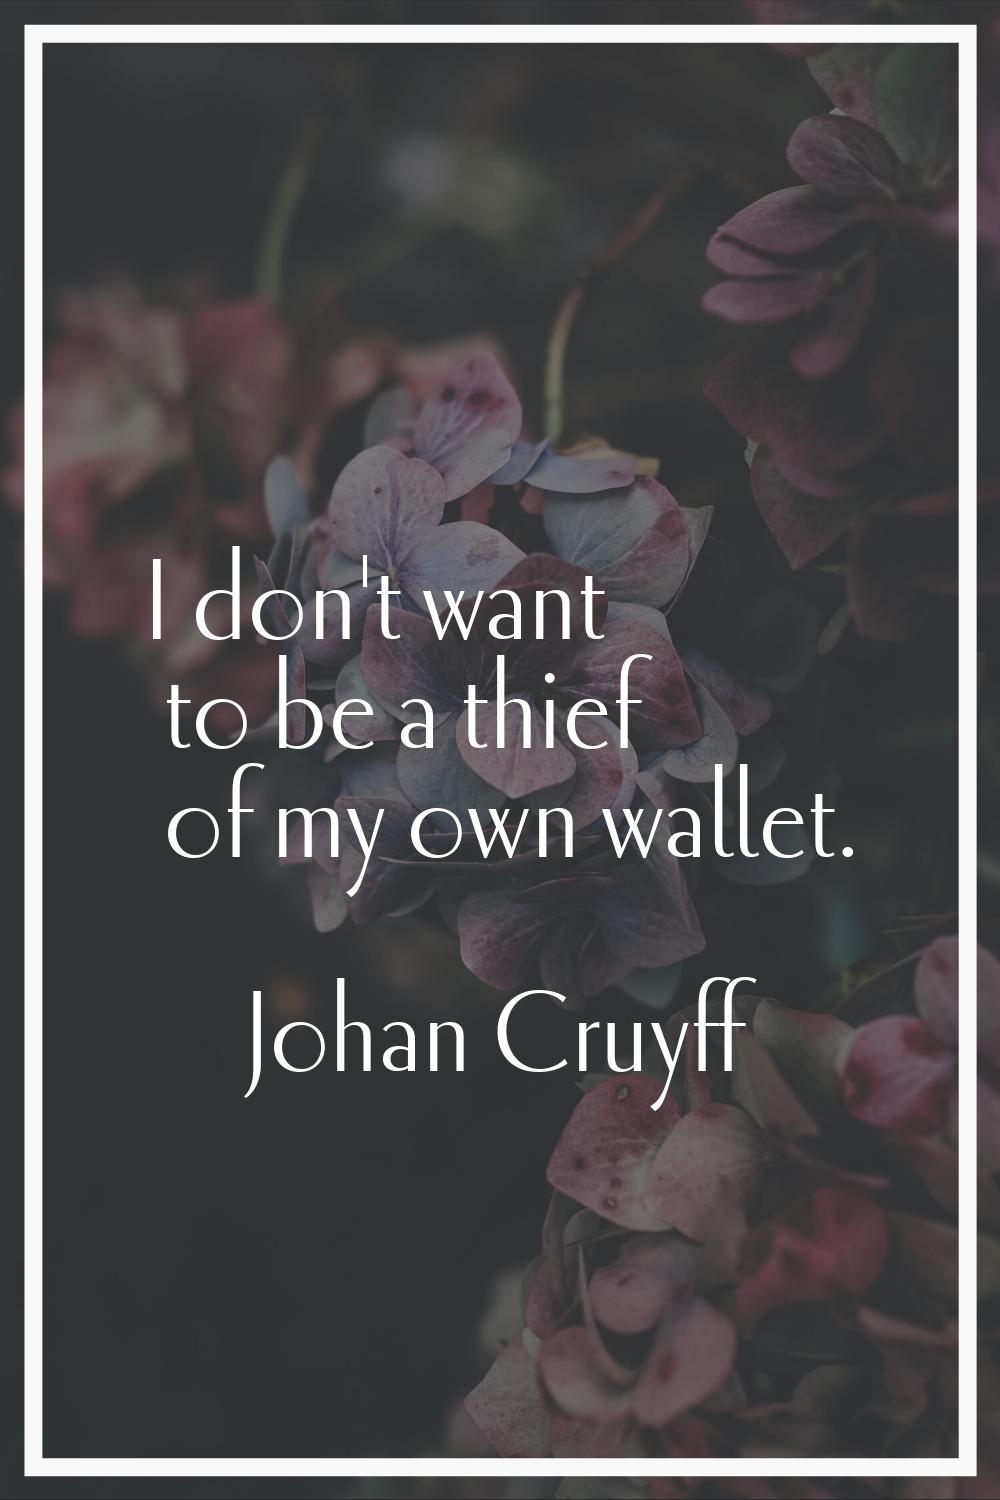 I don't want to be a thief of my own wallet.